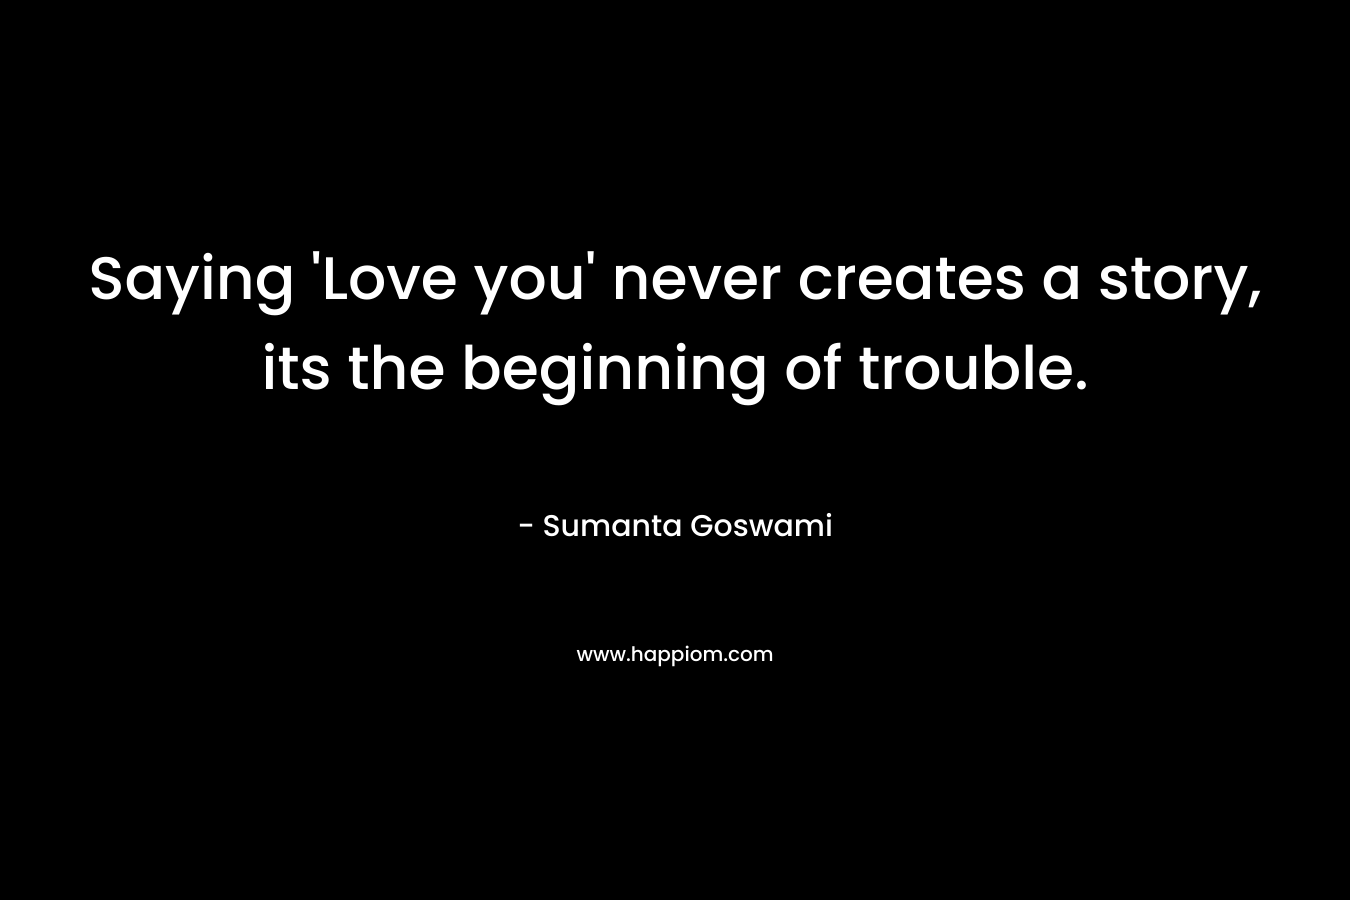 Saying 'Love you' never creates a story, its the beginning of trouble.